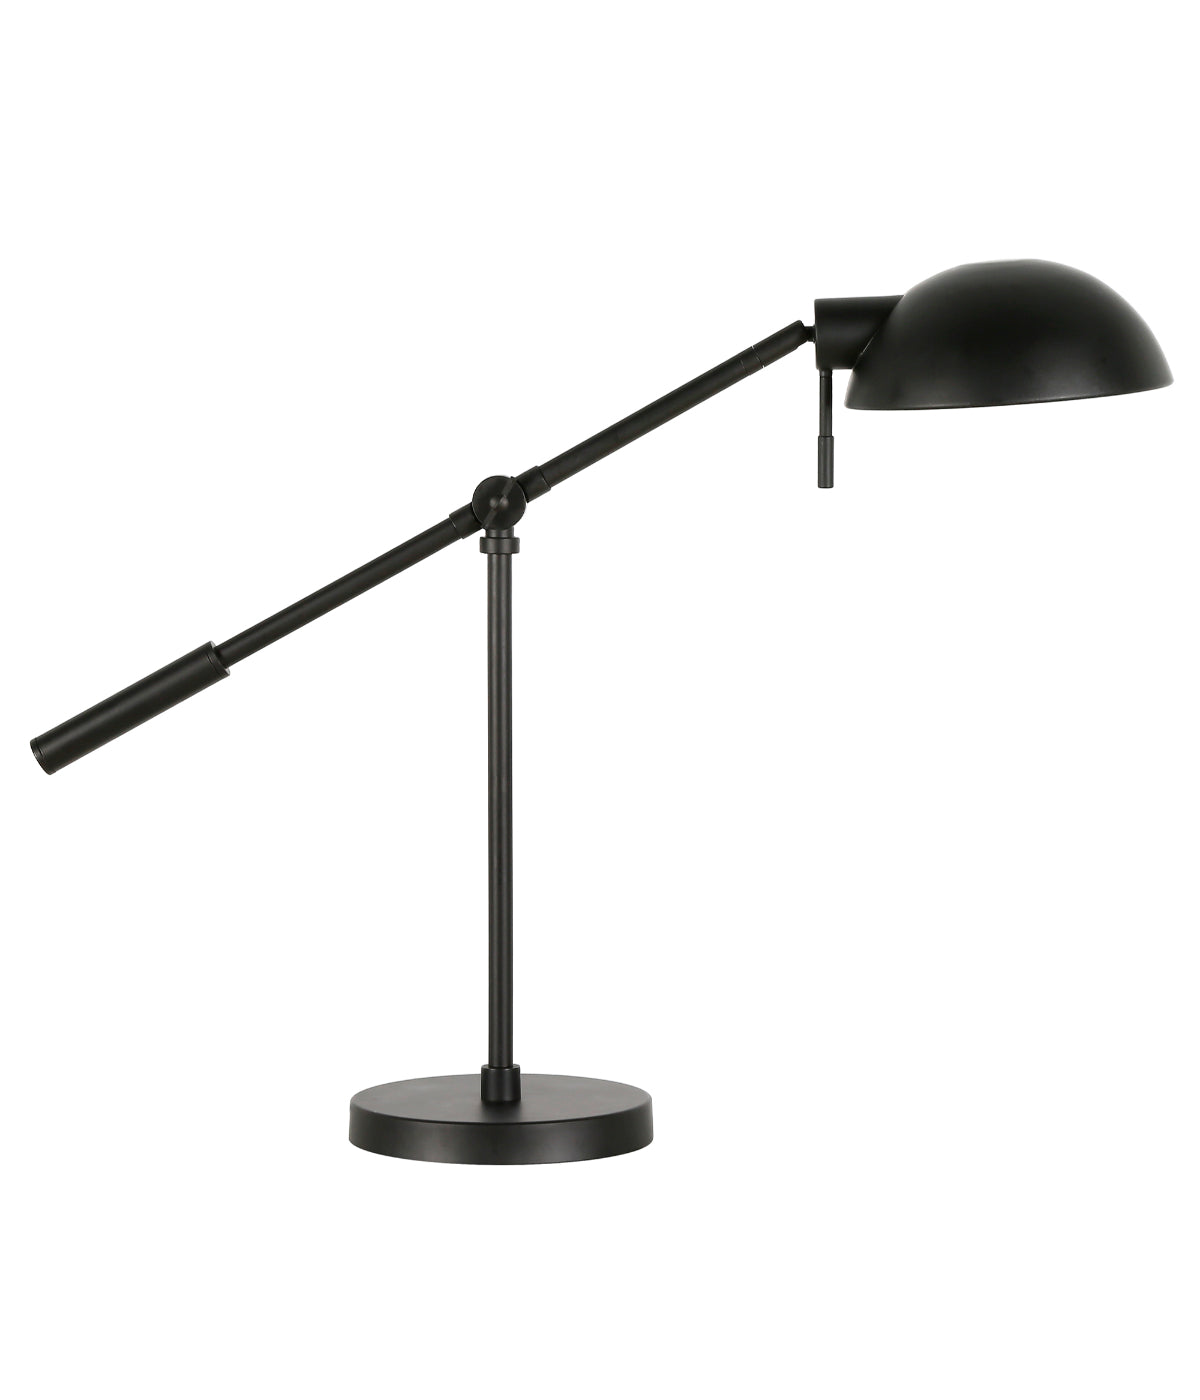 Donnell Boom Arm Table Lamp with Metal Shade Blackened Bronze